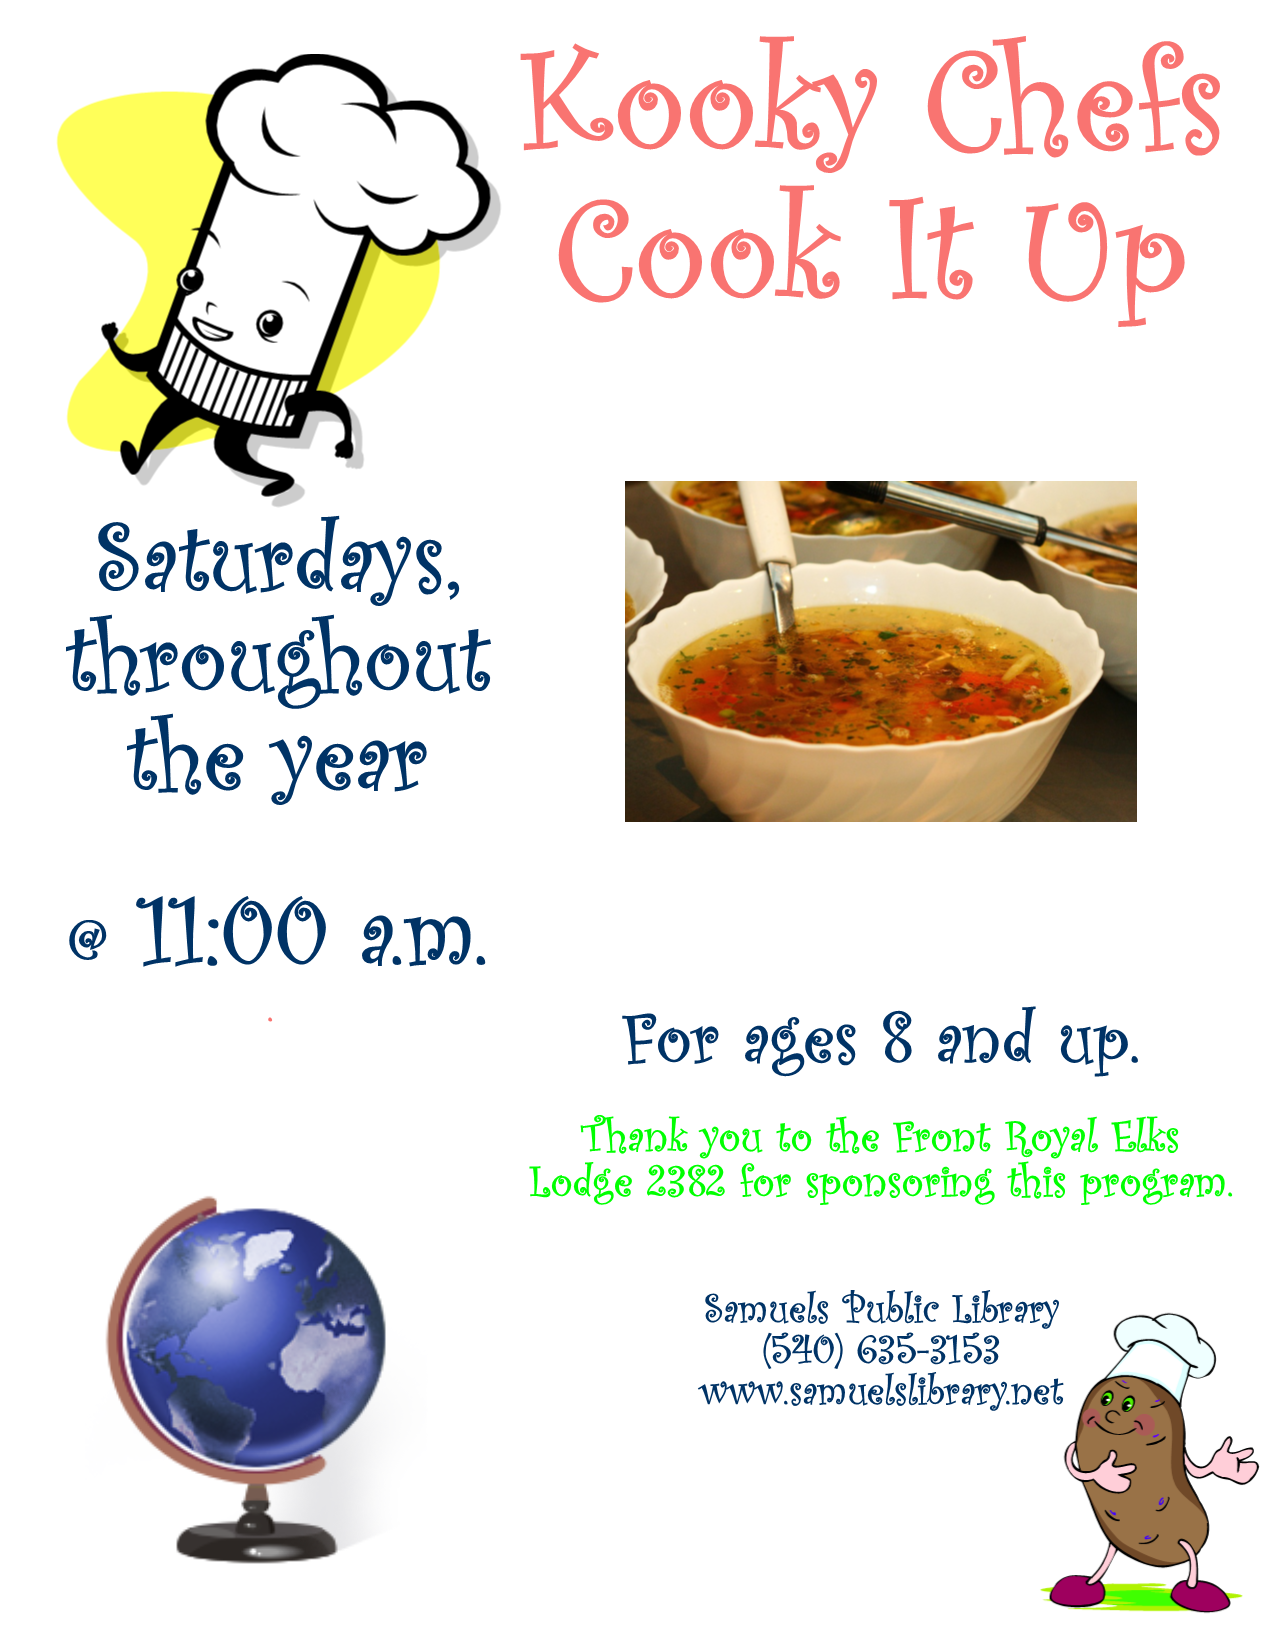 Kooky Chefs Saturday, May 9 at 11:00 A.M.